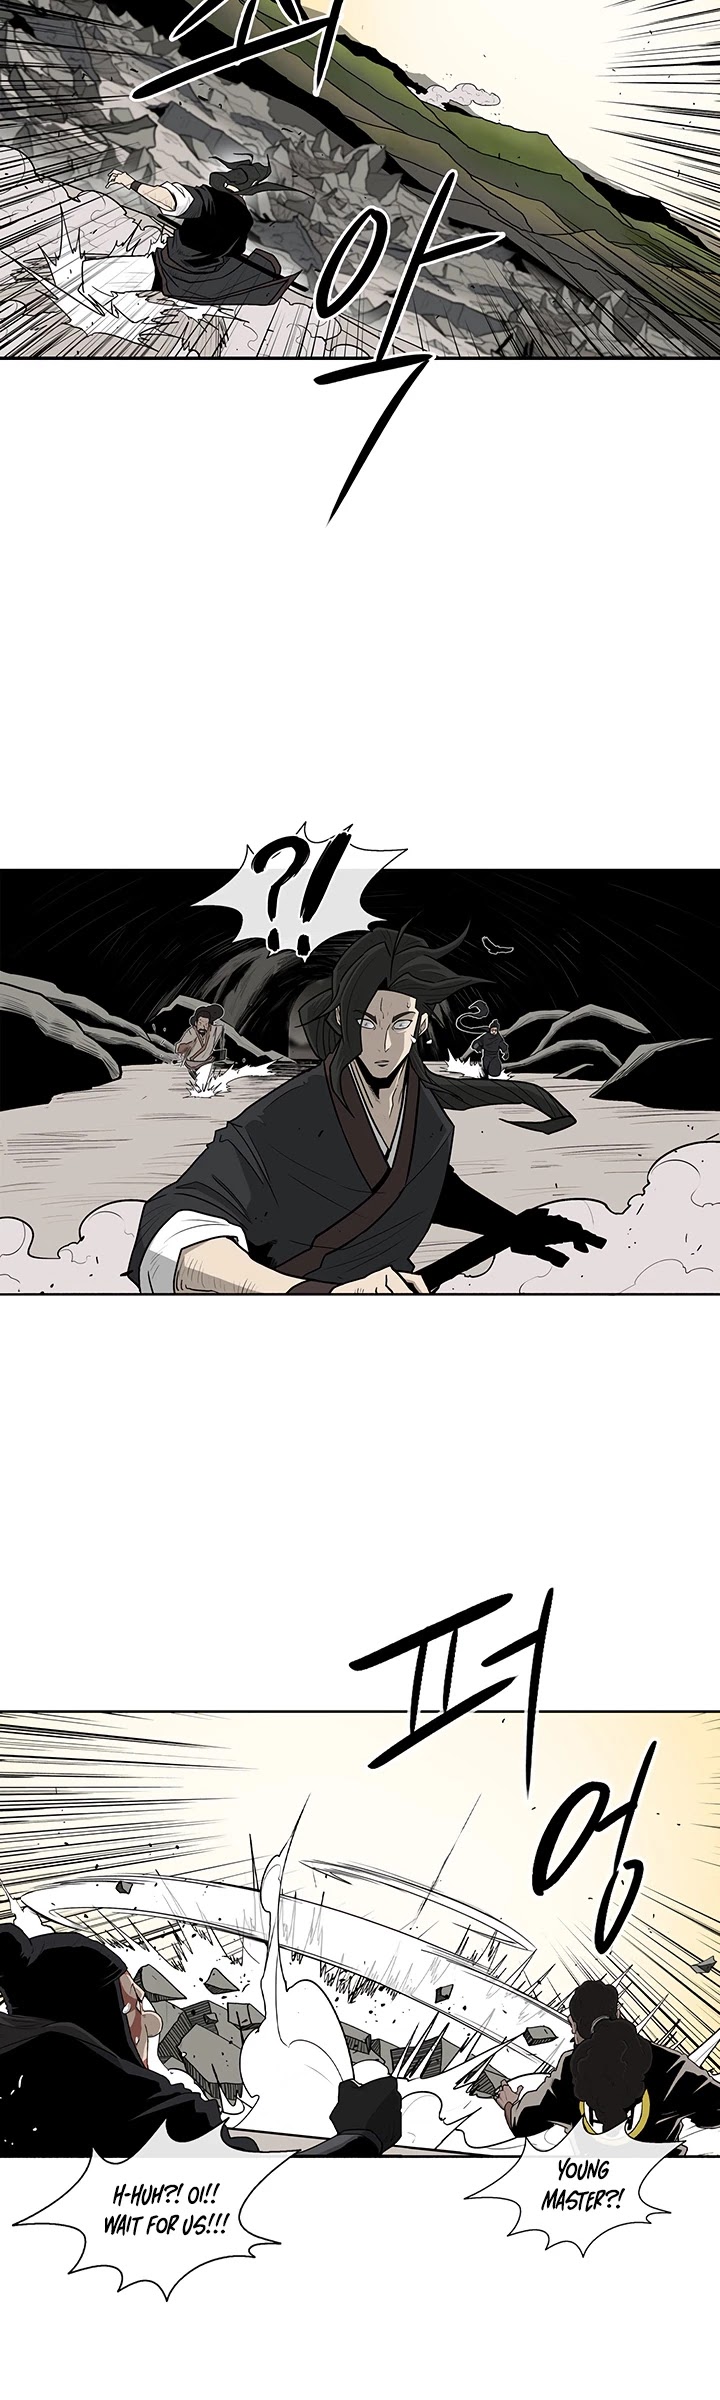 Legend Of The Northern Blade Chapter 63